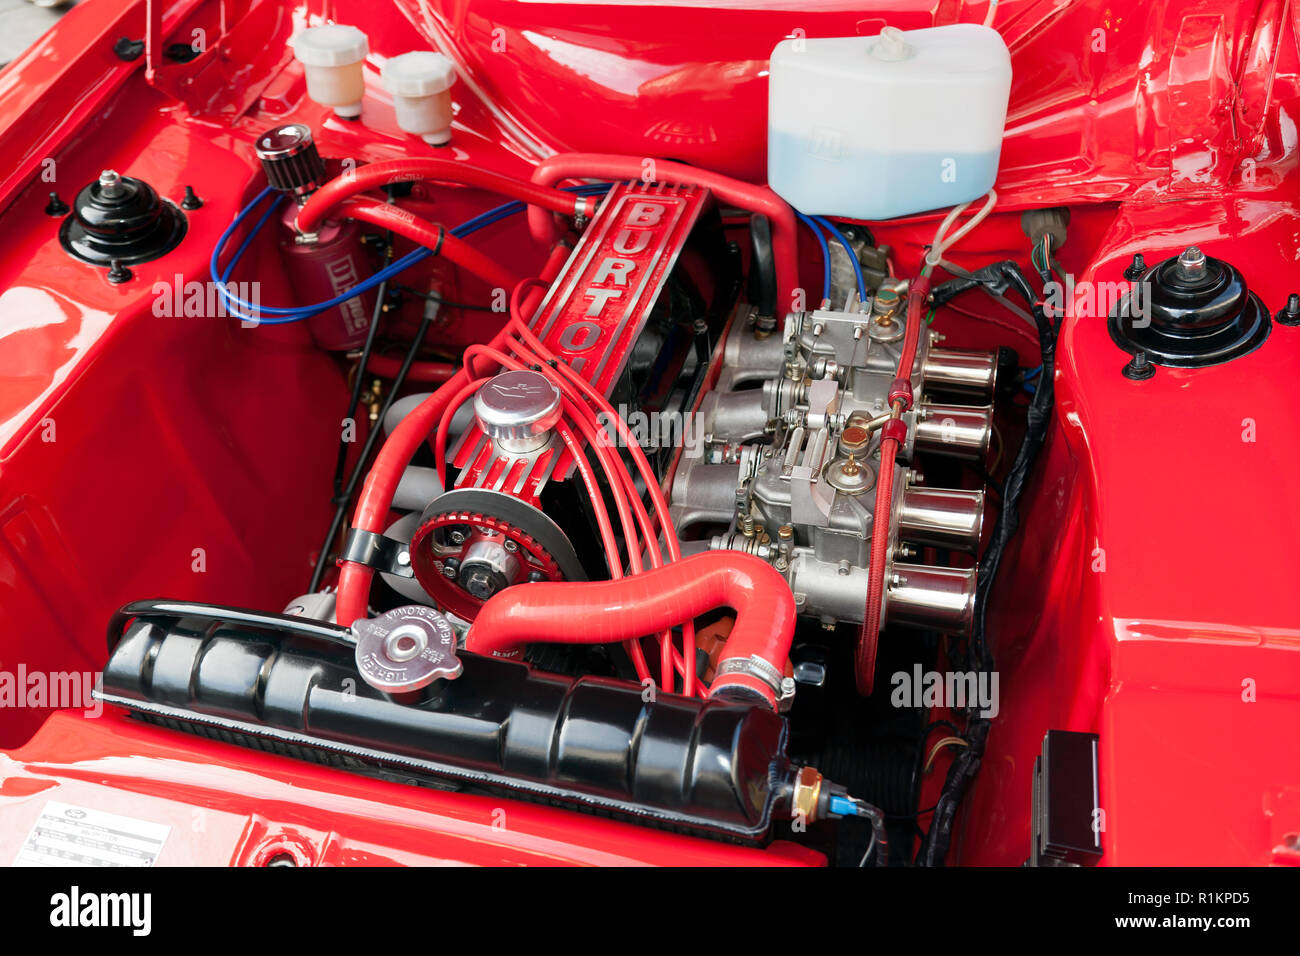 Close-up view of the  heavily modified engine  of a 1974 Ford Escort Mk 1, on display at the Regents Street Motor Show 2018 Stock Photo